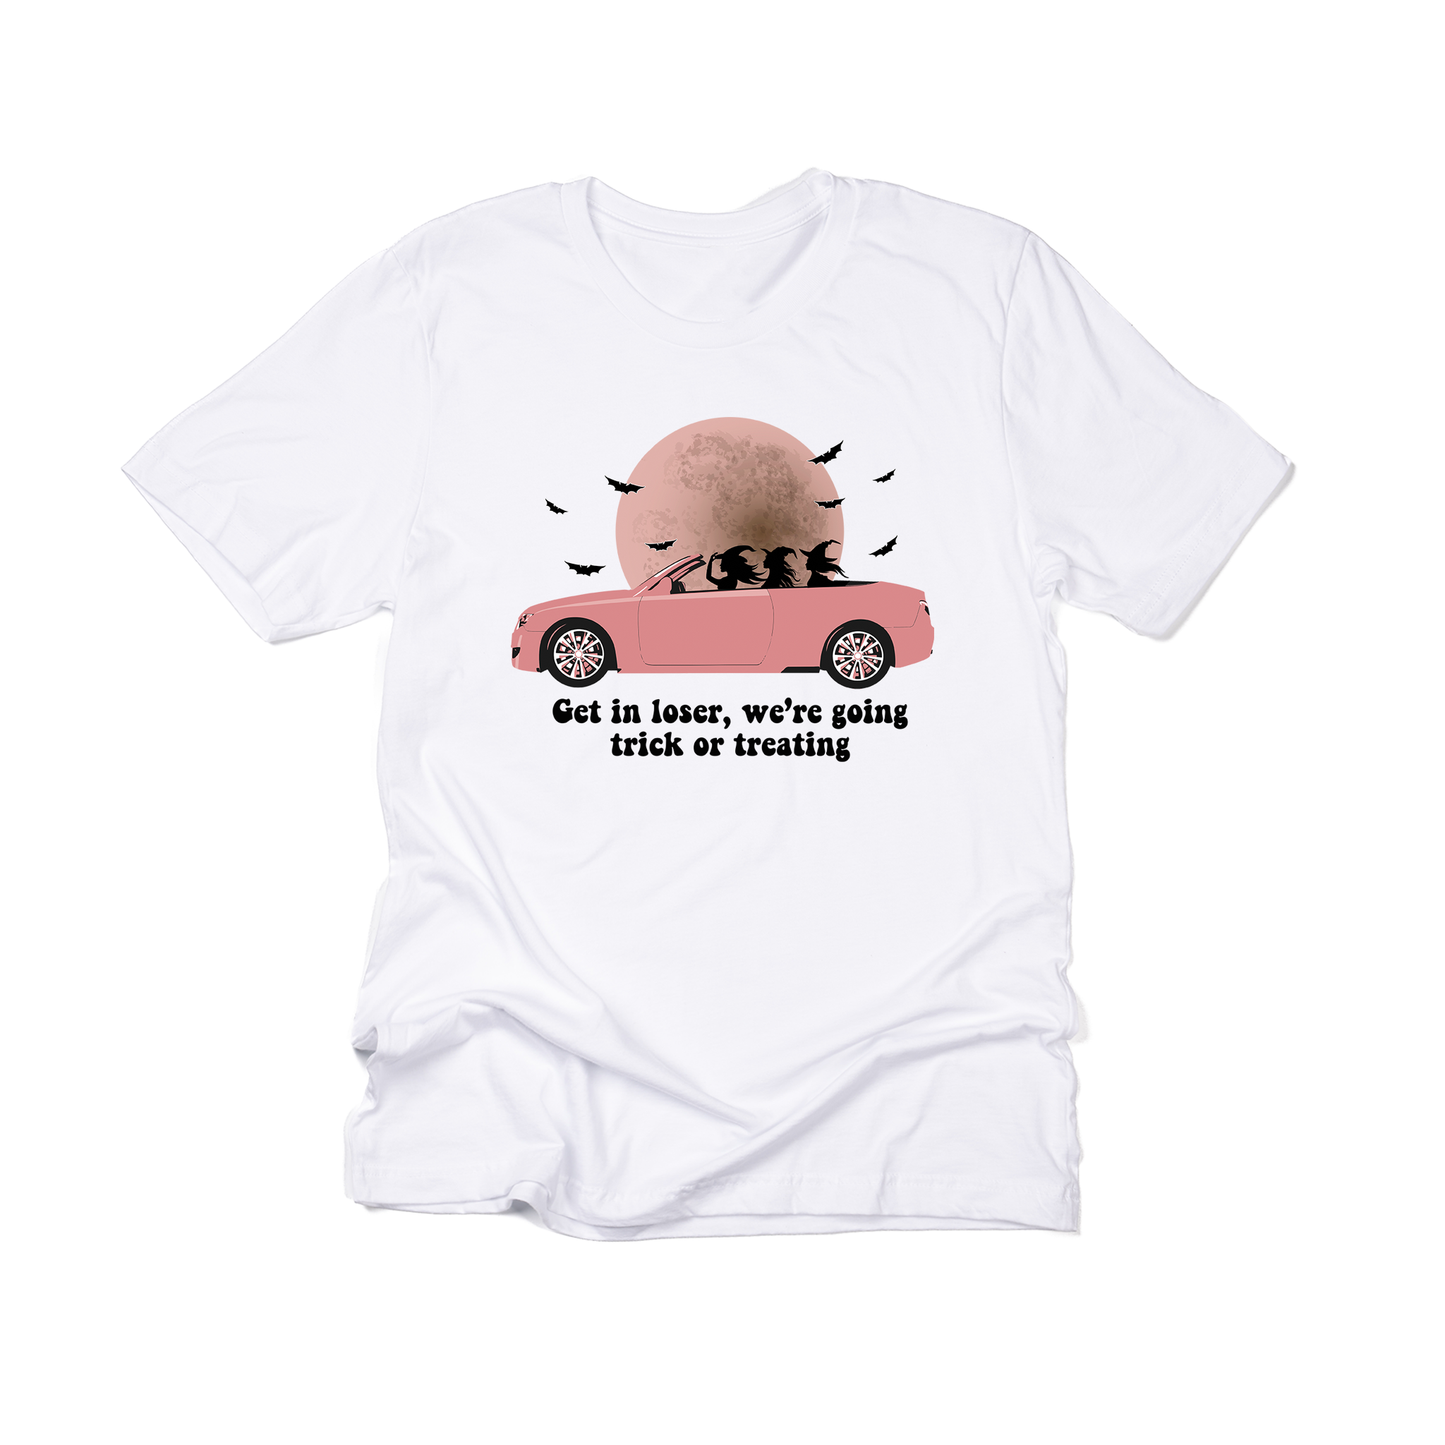 Get in Loser, We're Going Trick or Treating(Black) - Tee (White)